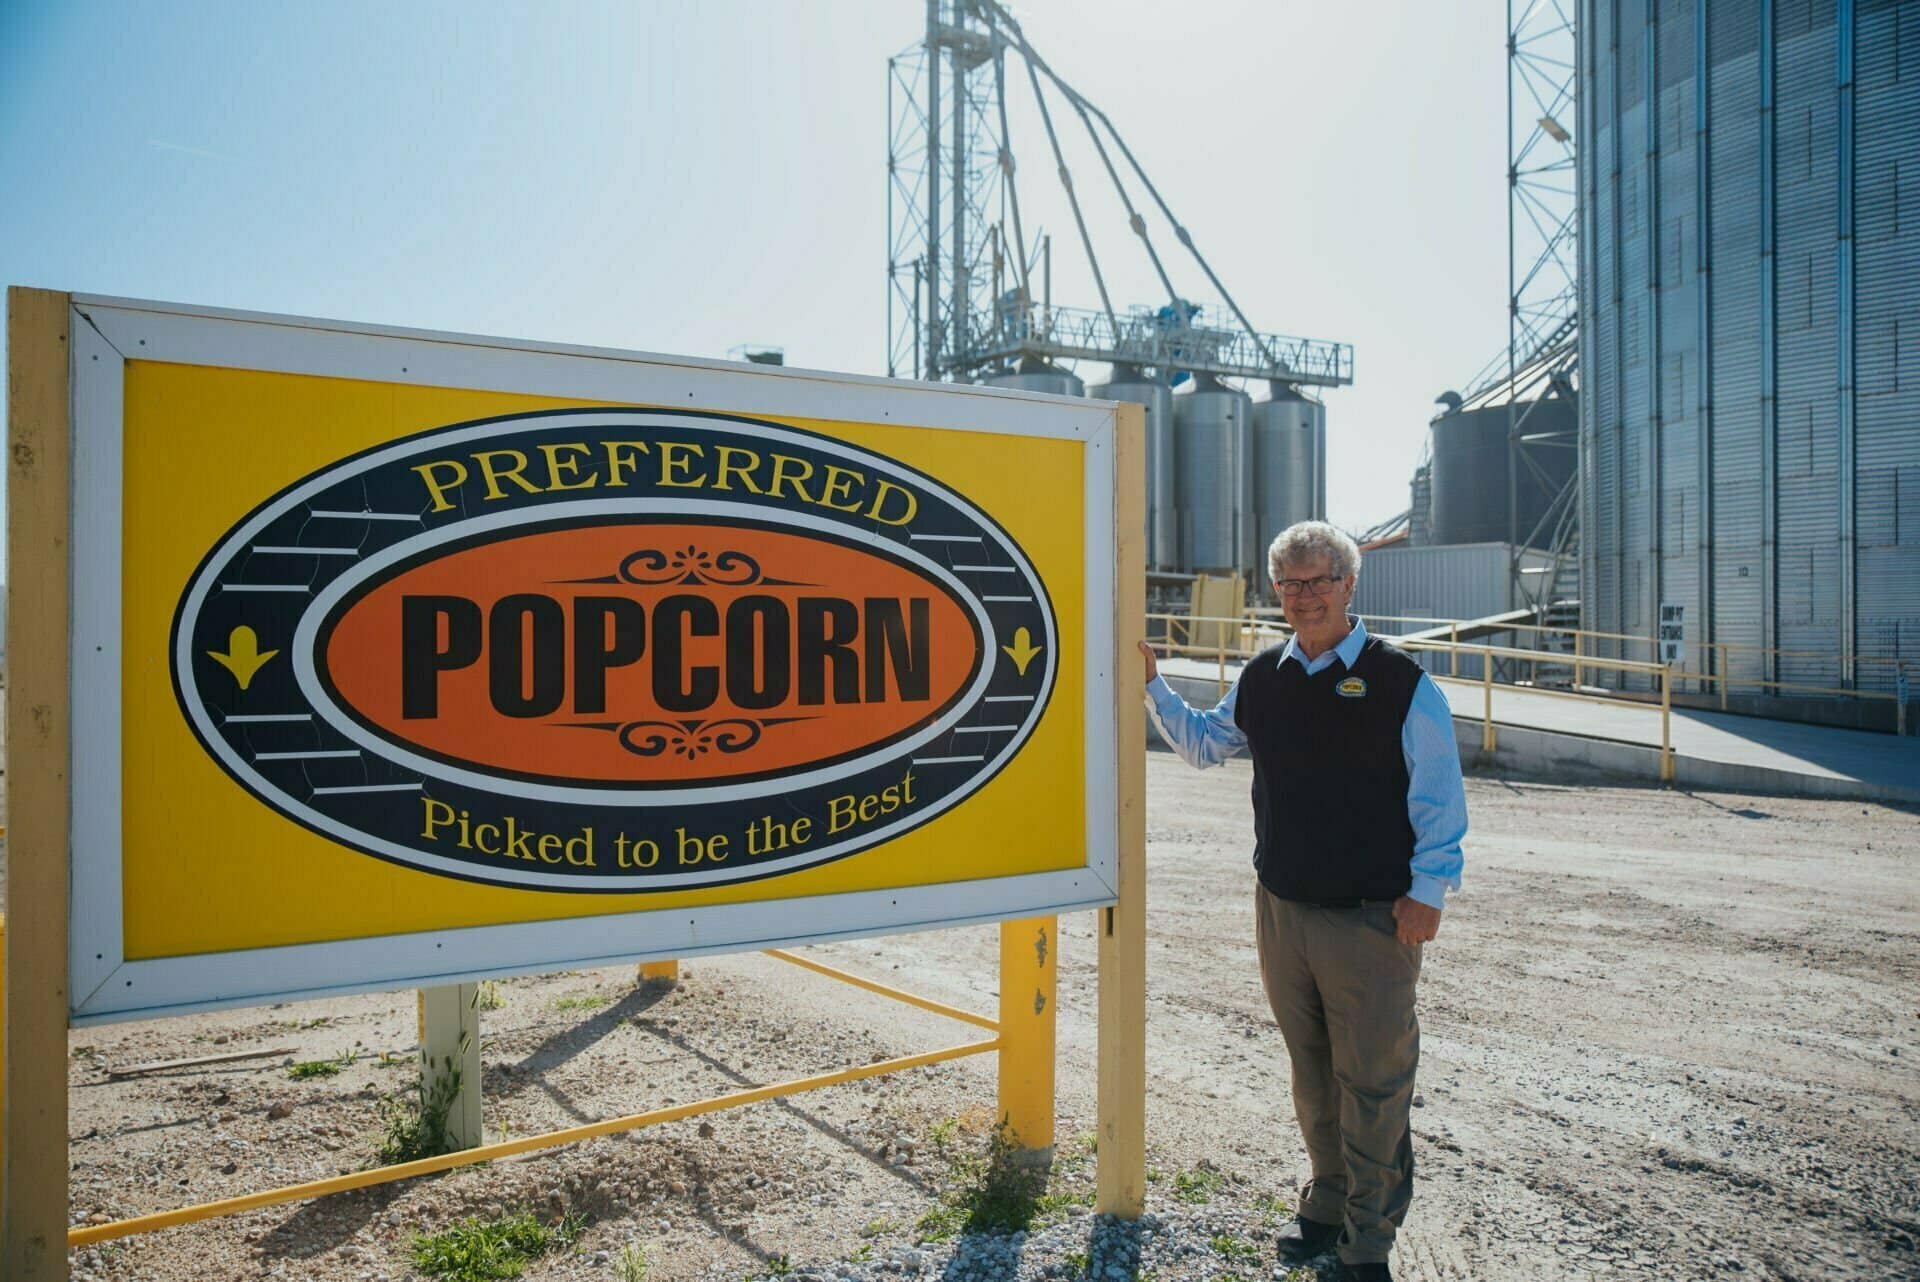 Norm Krug stands next to a sign for Preferred Popcorn.